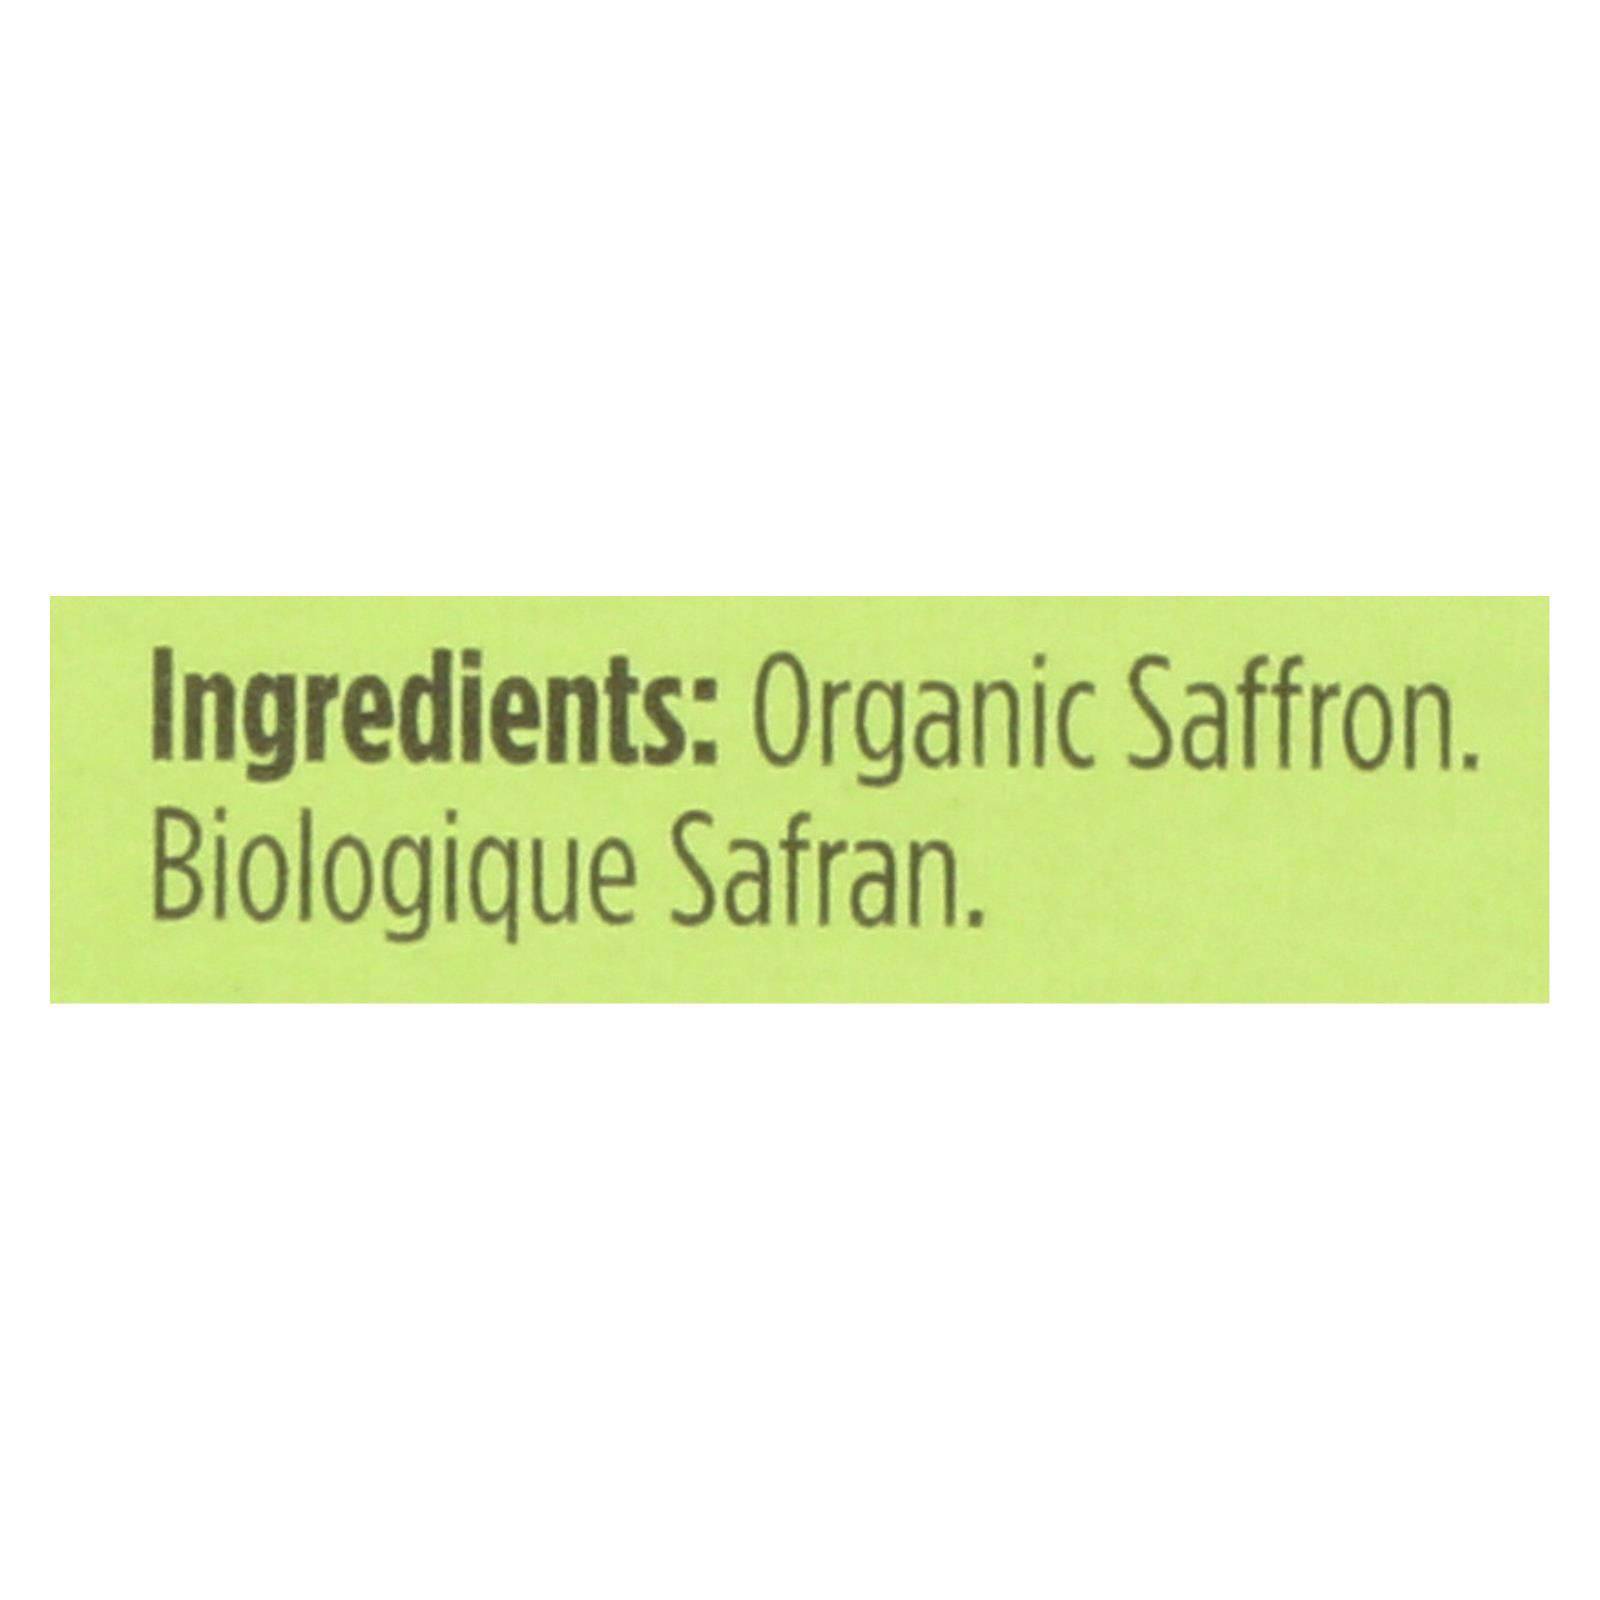 Buy Spicely Organics - Organic Saffron - Case Of 6 - 0.007 Oz.  at OnlyNaturals.us